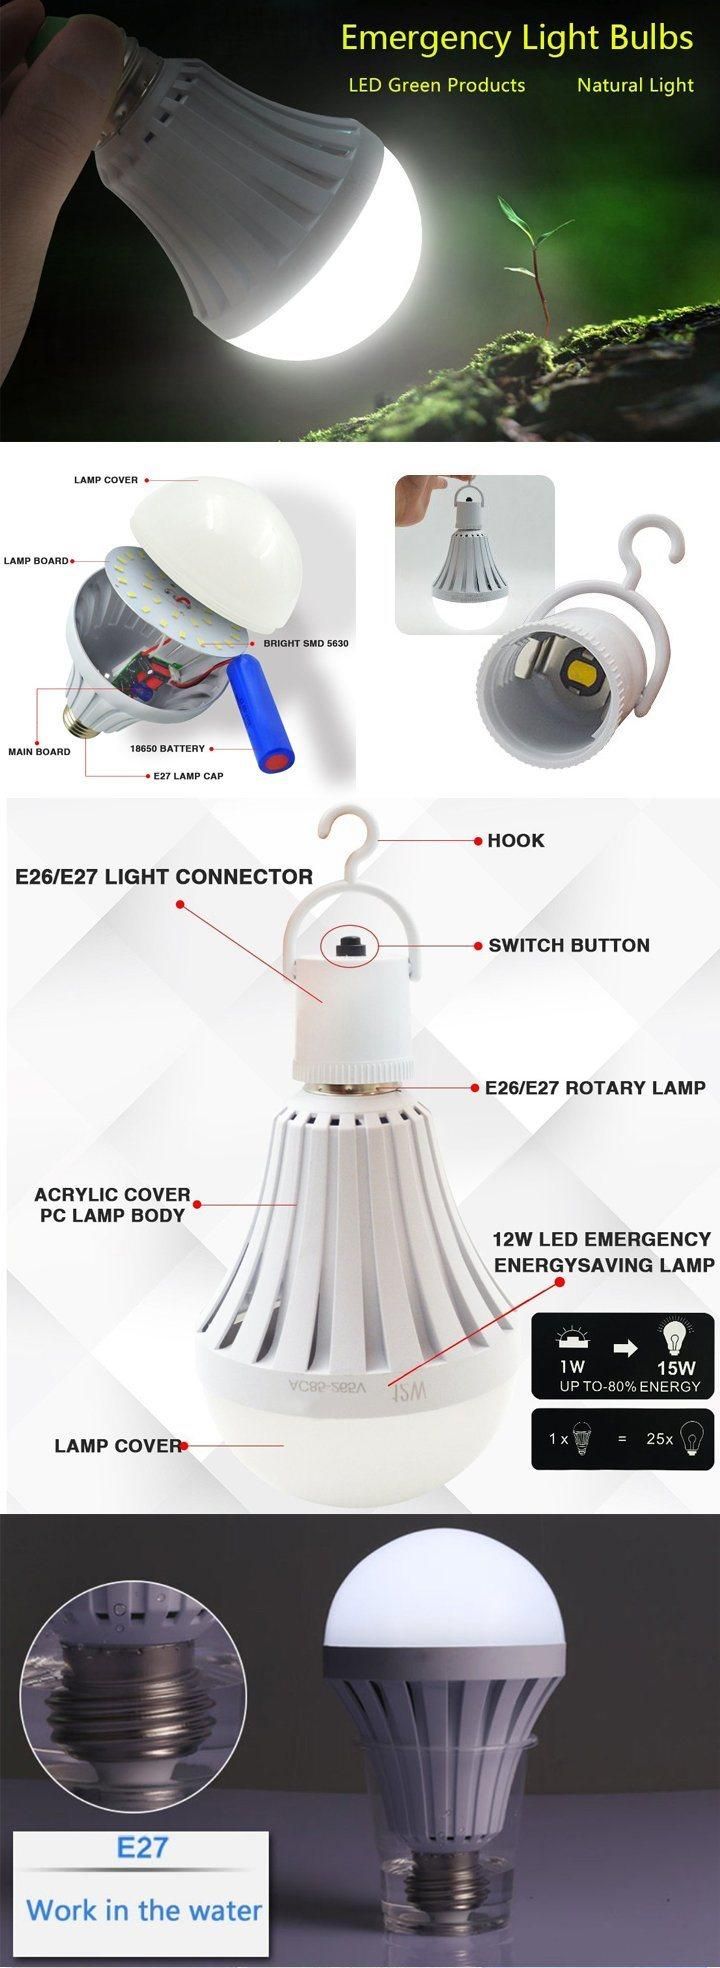 China Jiangmen Factory Rechargeable Emergency LED Bulb Lights with Built-in Battery